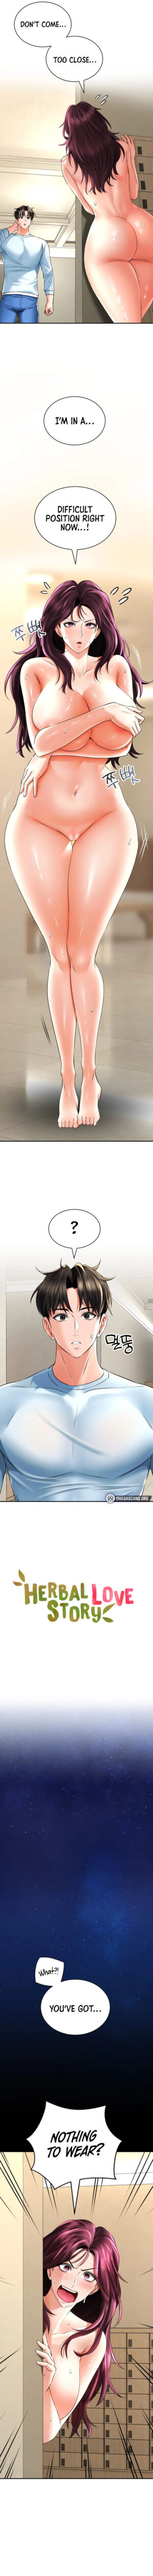 [Lee Juwon] Herbal Love Story (1-19.5) [English] [Omega Scans] [Ongoing]